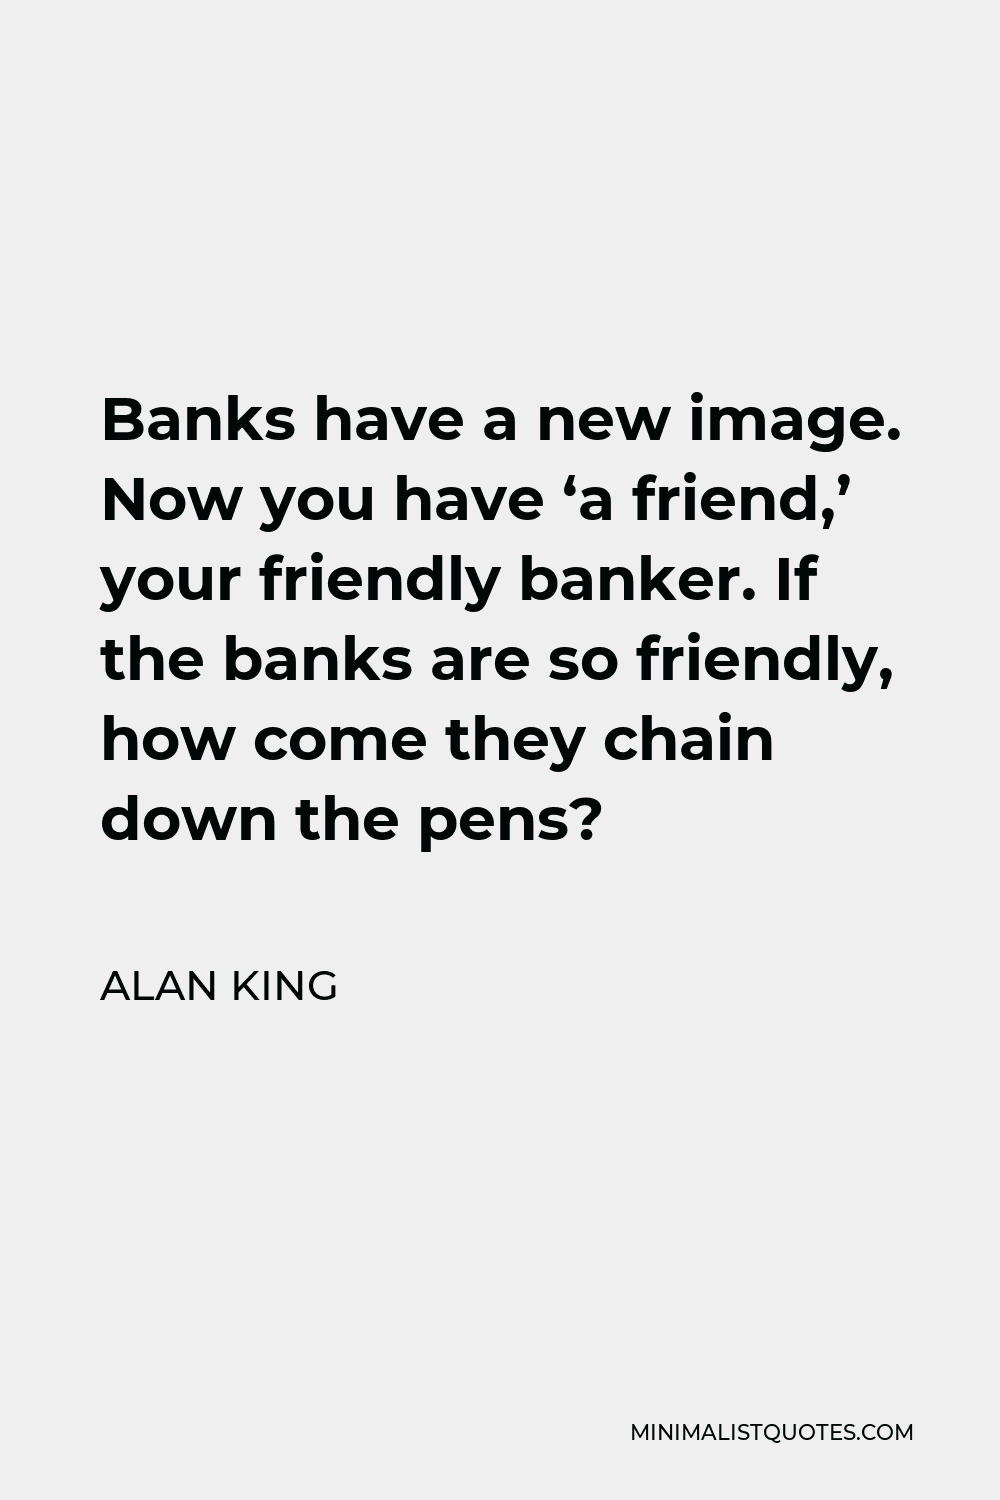 Alan King Quote - Banks have a new image. Now you have ‘a friend,’ your friendly banker. If the banks are so friendly, how come they chain down the pens?